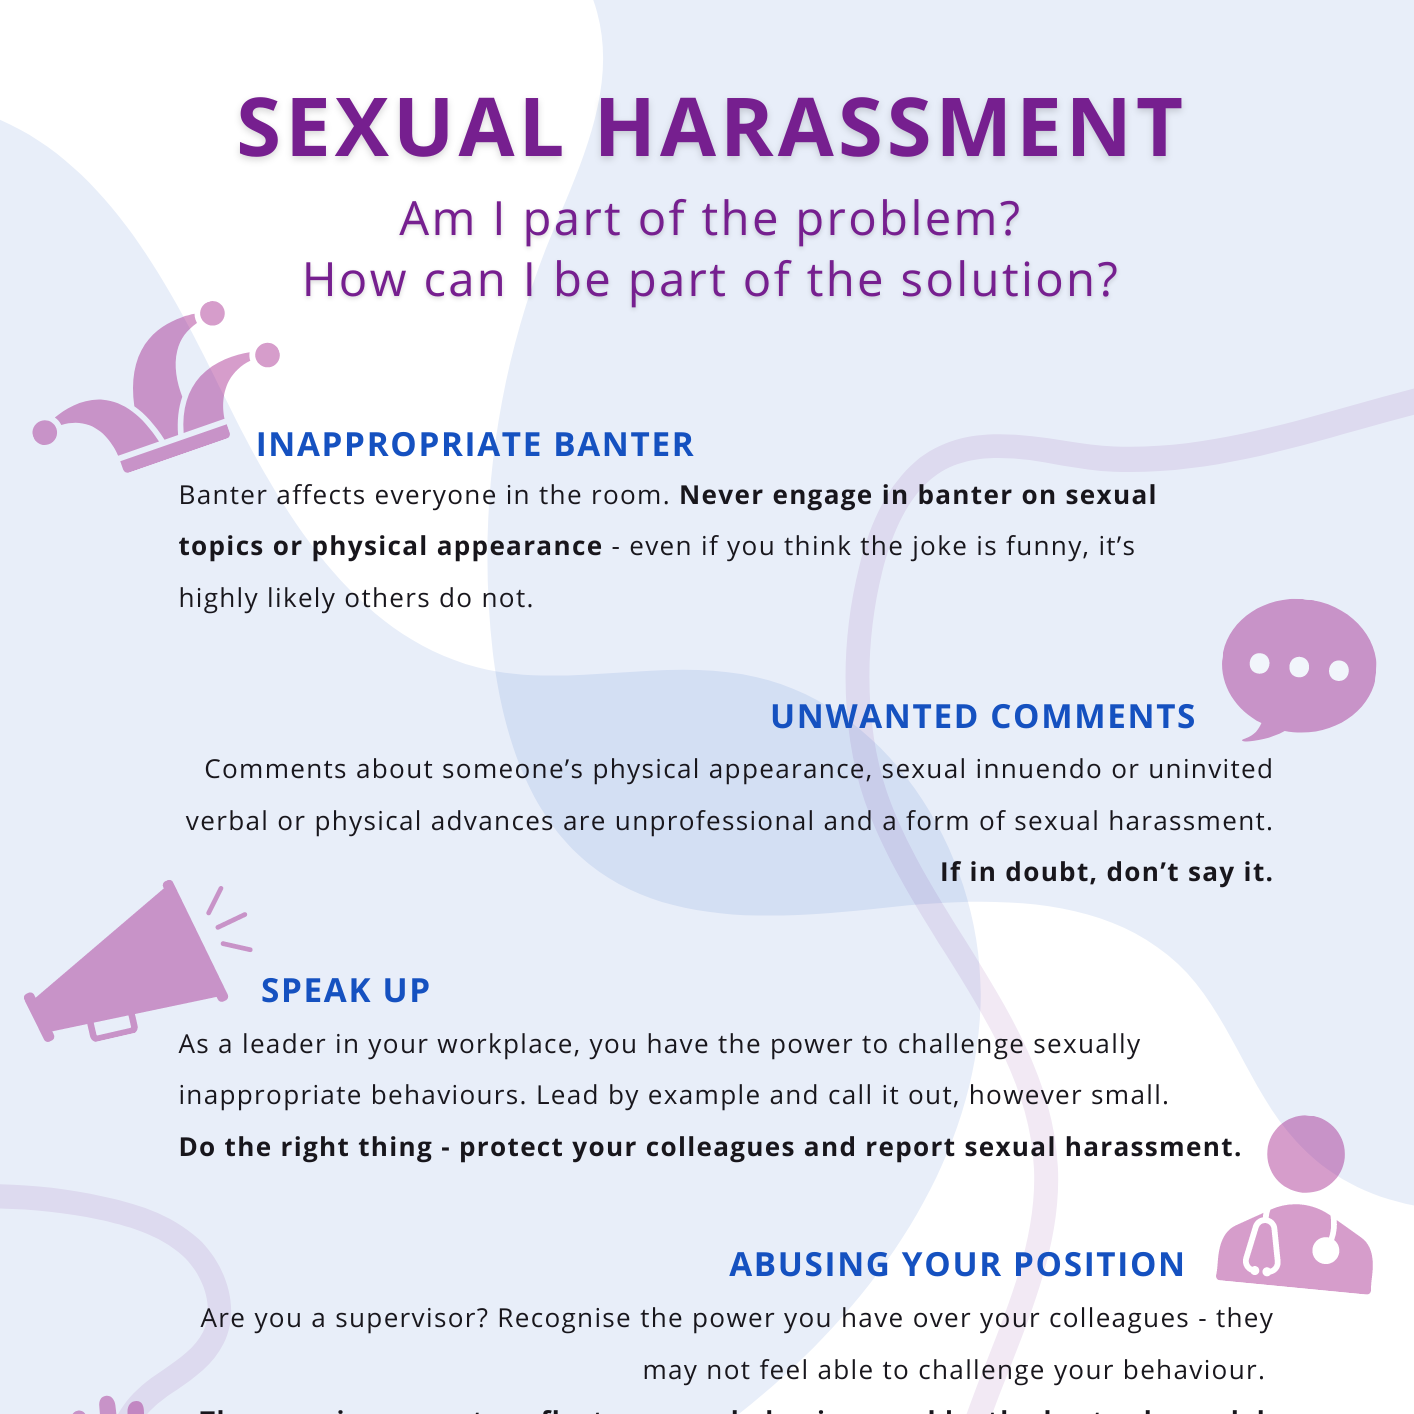 Sexual-Harassment-Am-I-part-of-the-problem_1.png